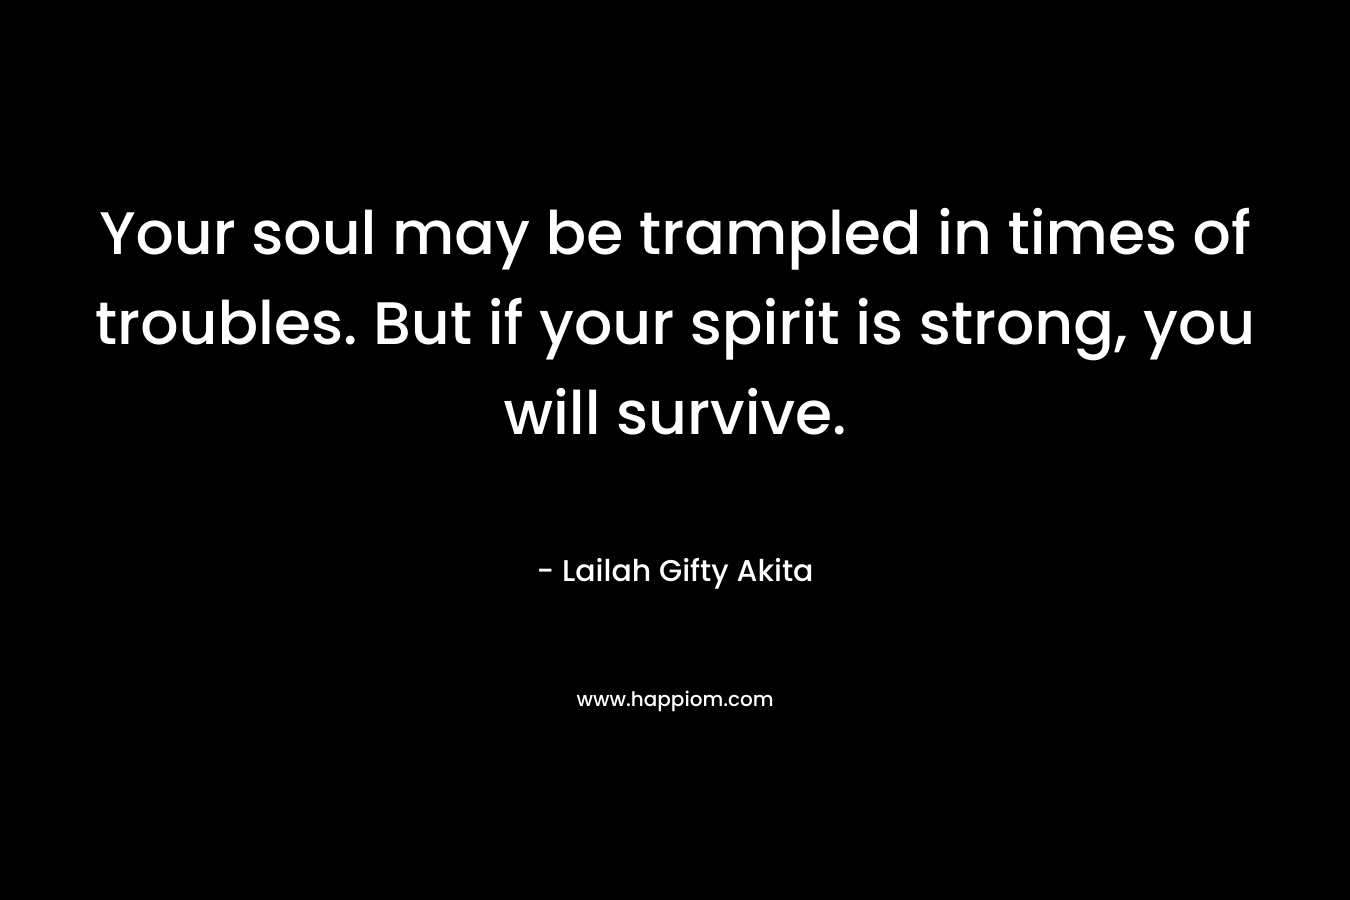 Your soul may be trampled in times of troubles. But if your spirit is strong, you will survive.